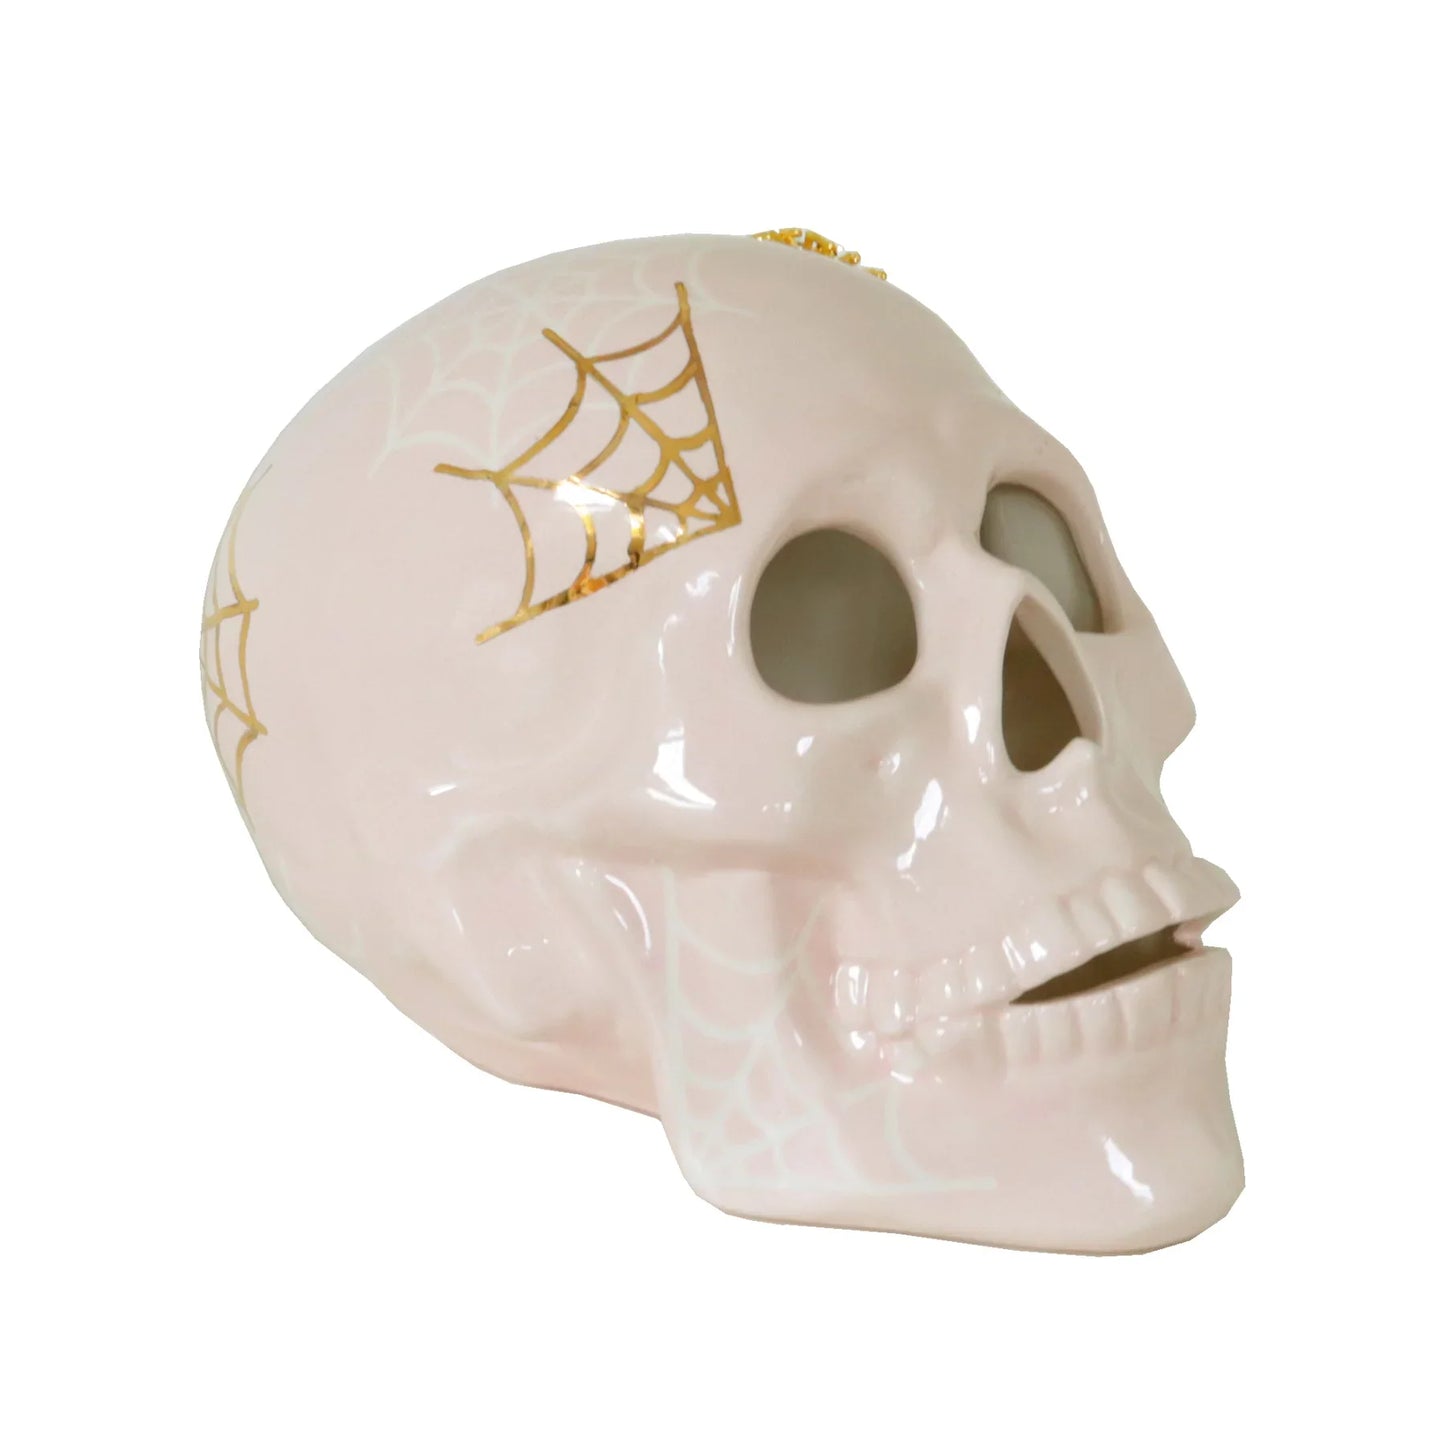 "Mr. Bones and Charlotte" Skull Decor with 22K Gold Accents- Blush | Wholesale